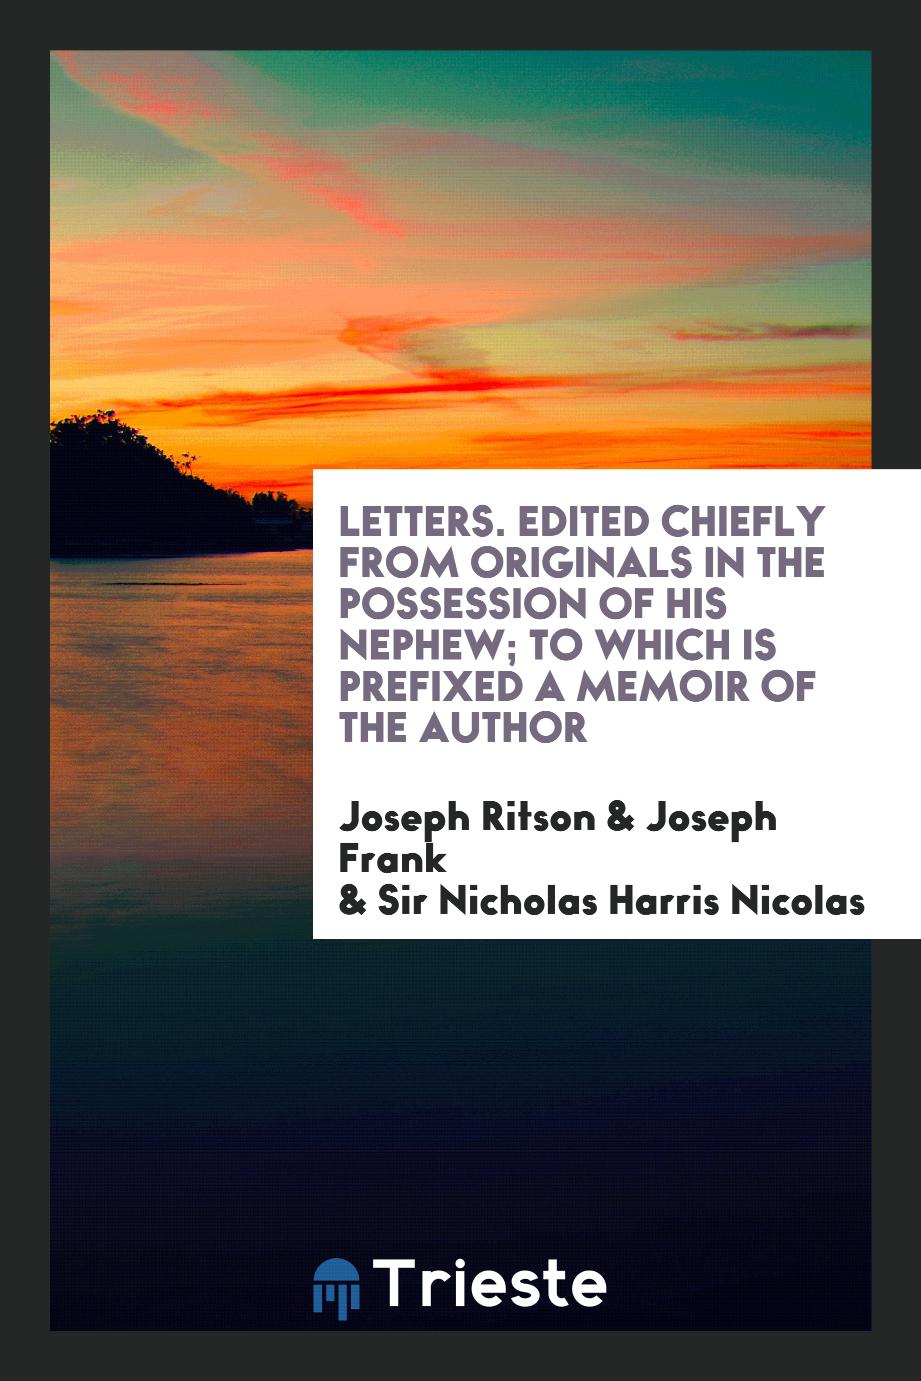 Letters. Edited chiefly from originals in the possession of his nephew; to which is prefixed a memoir of the author